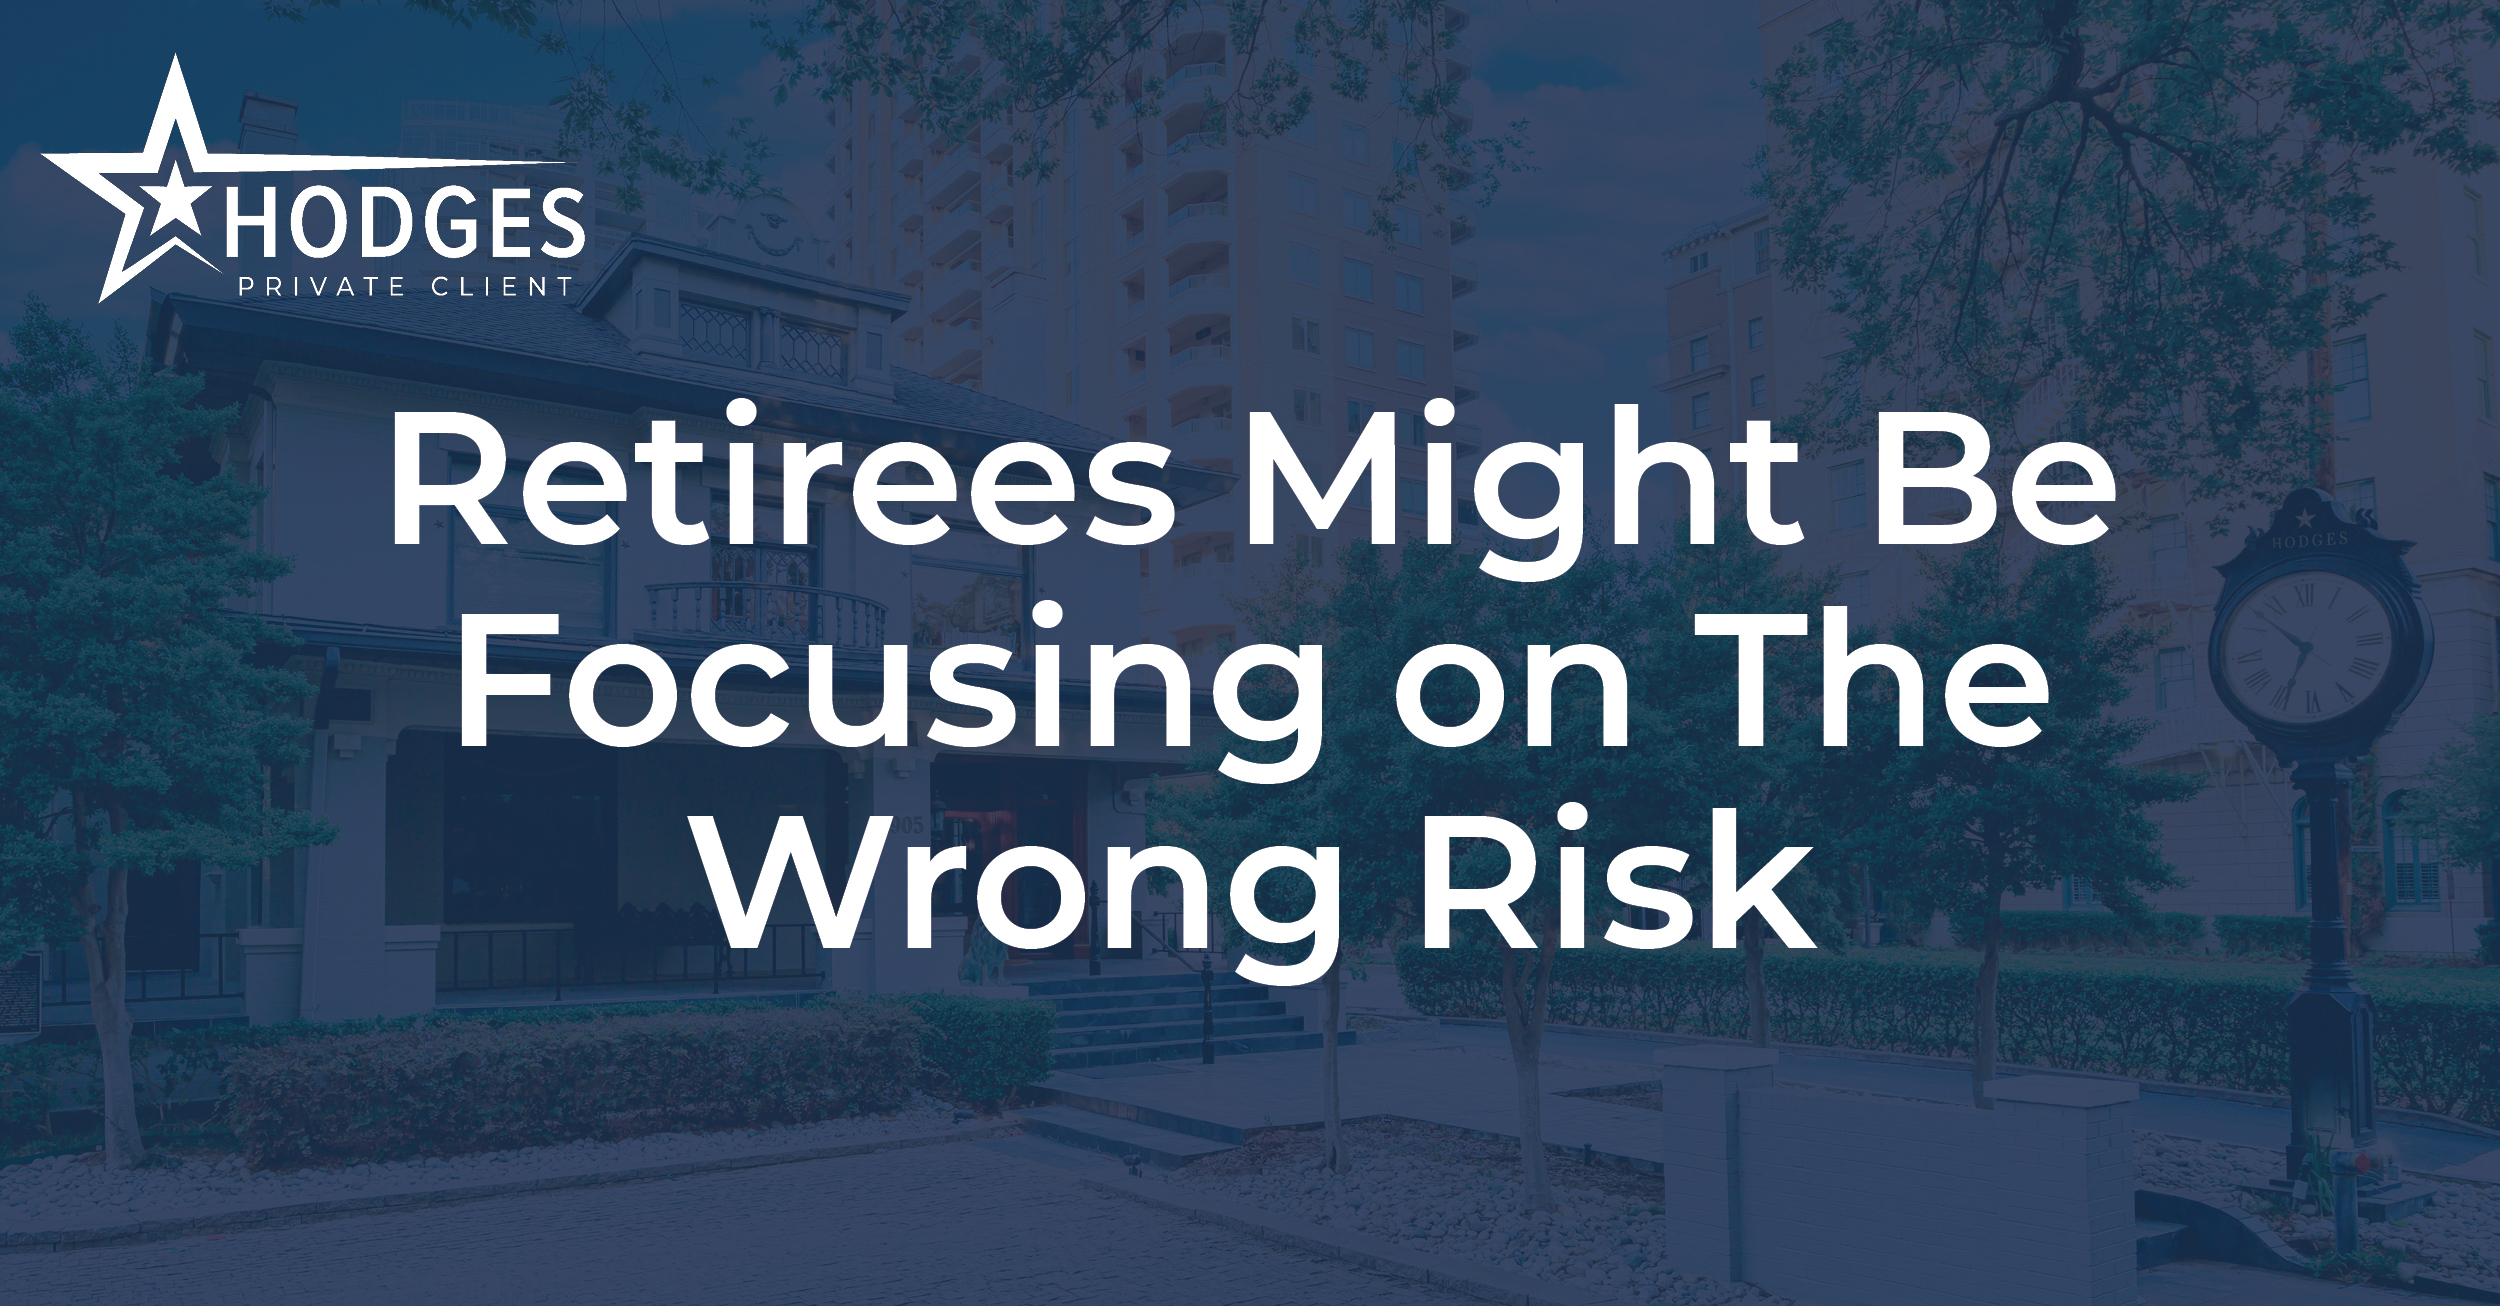 Retirees Might Be Focusing on The Wrong Risk